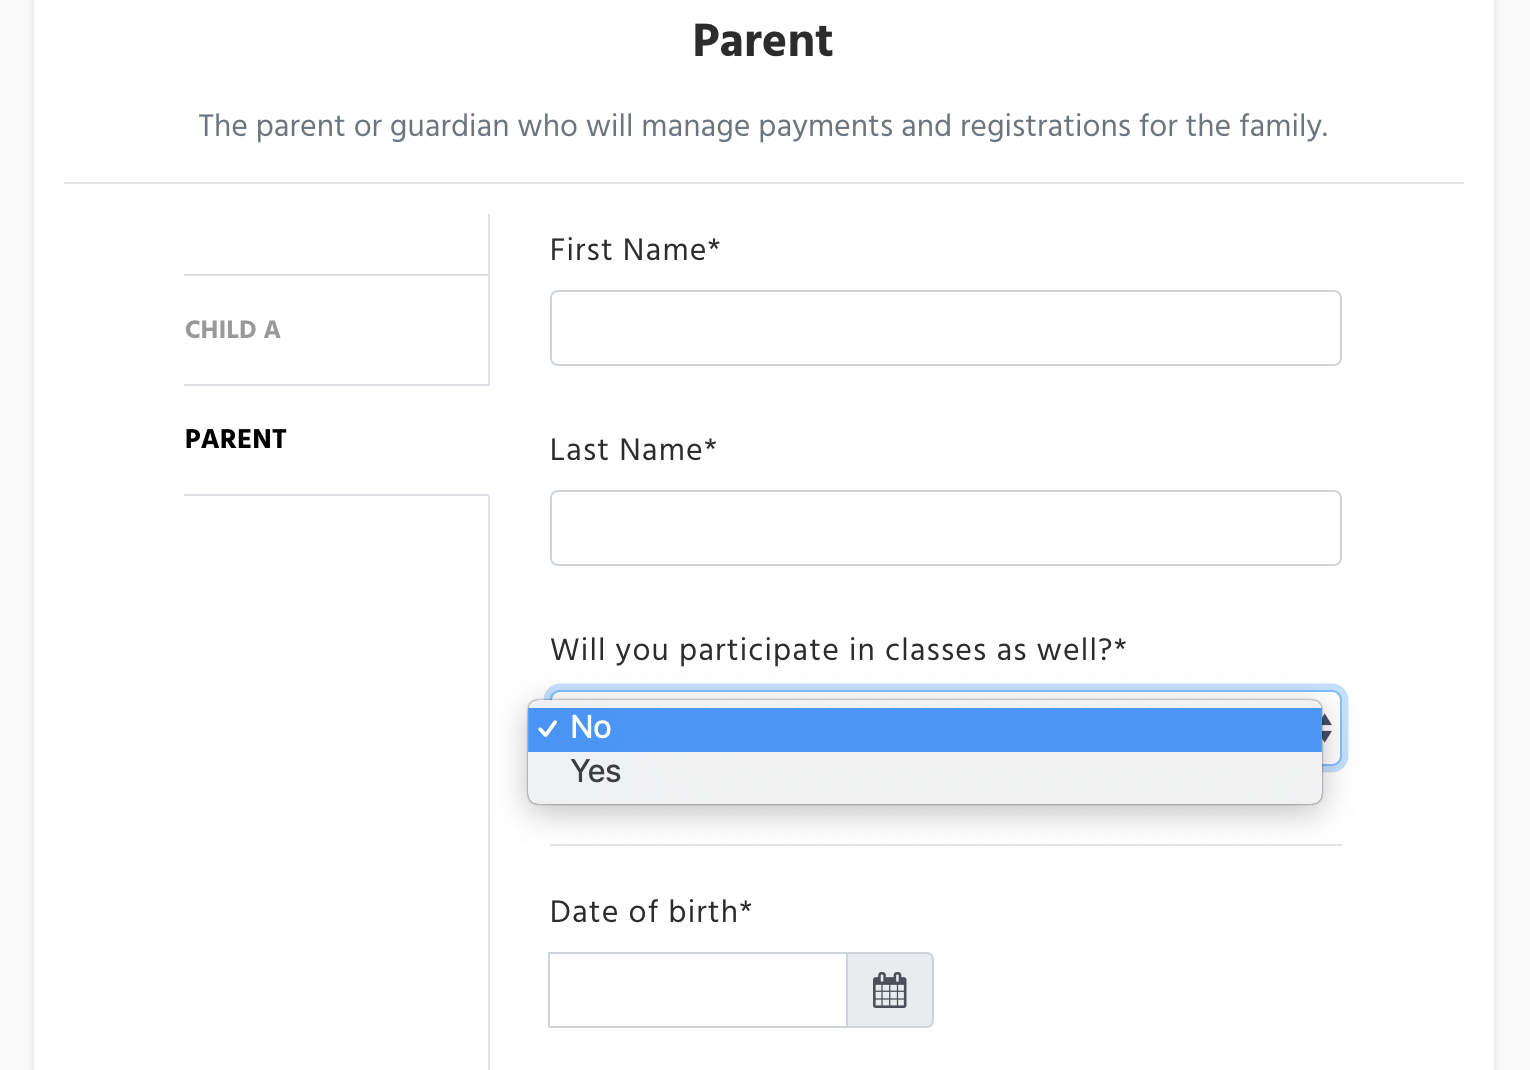 Non-paricipating parent sign up form, with the field "Will you paricipate in classes as well?", no highlighted.